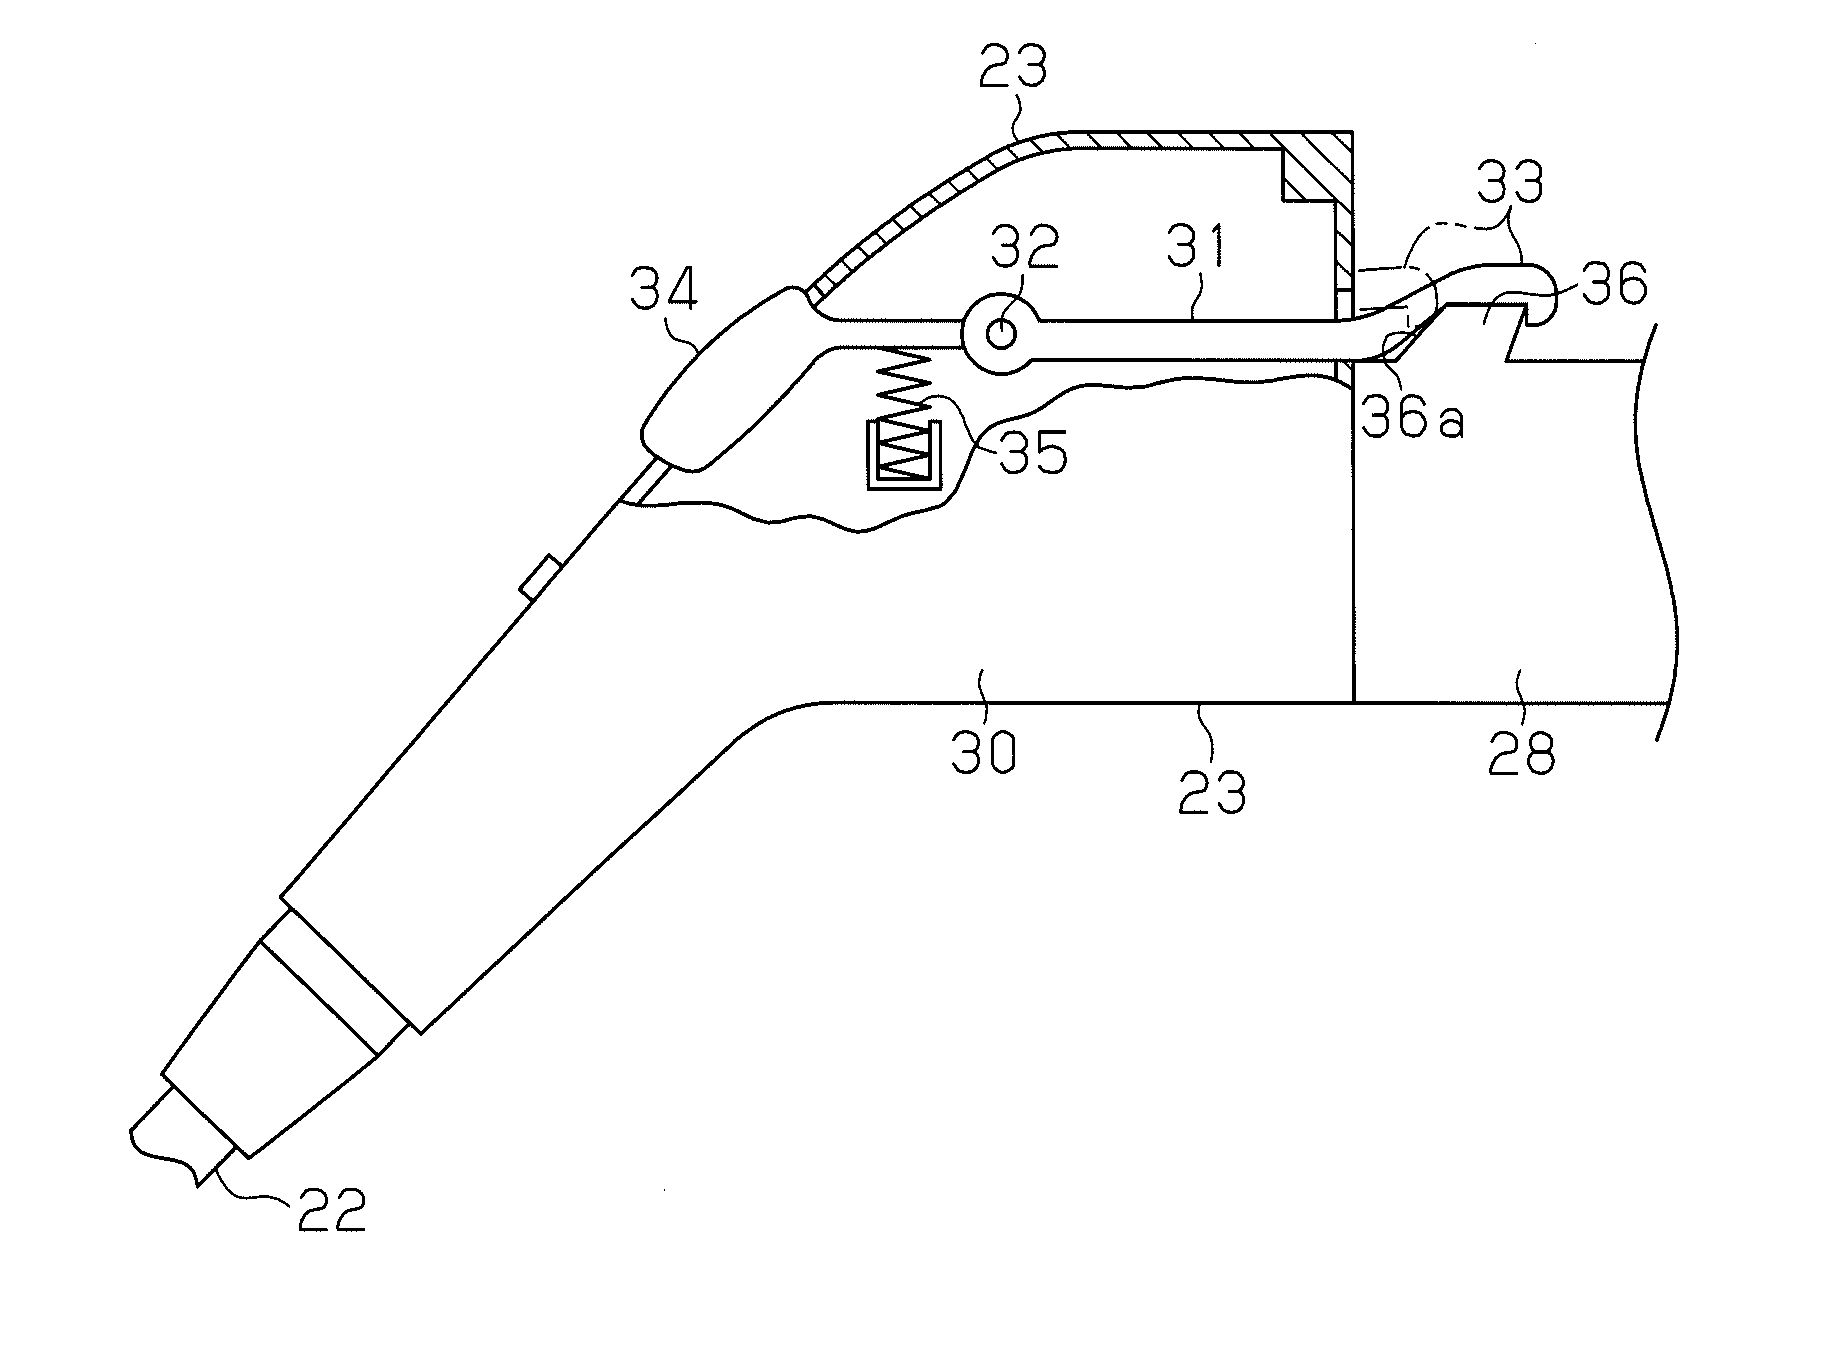 Charging inlet device